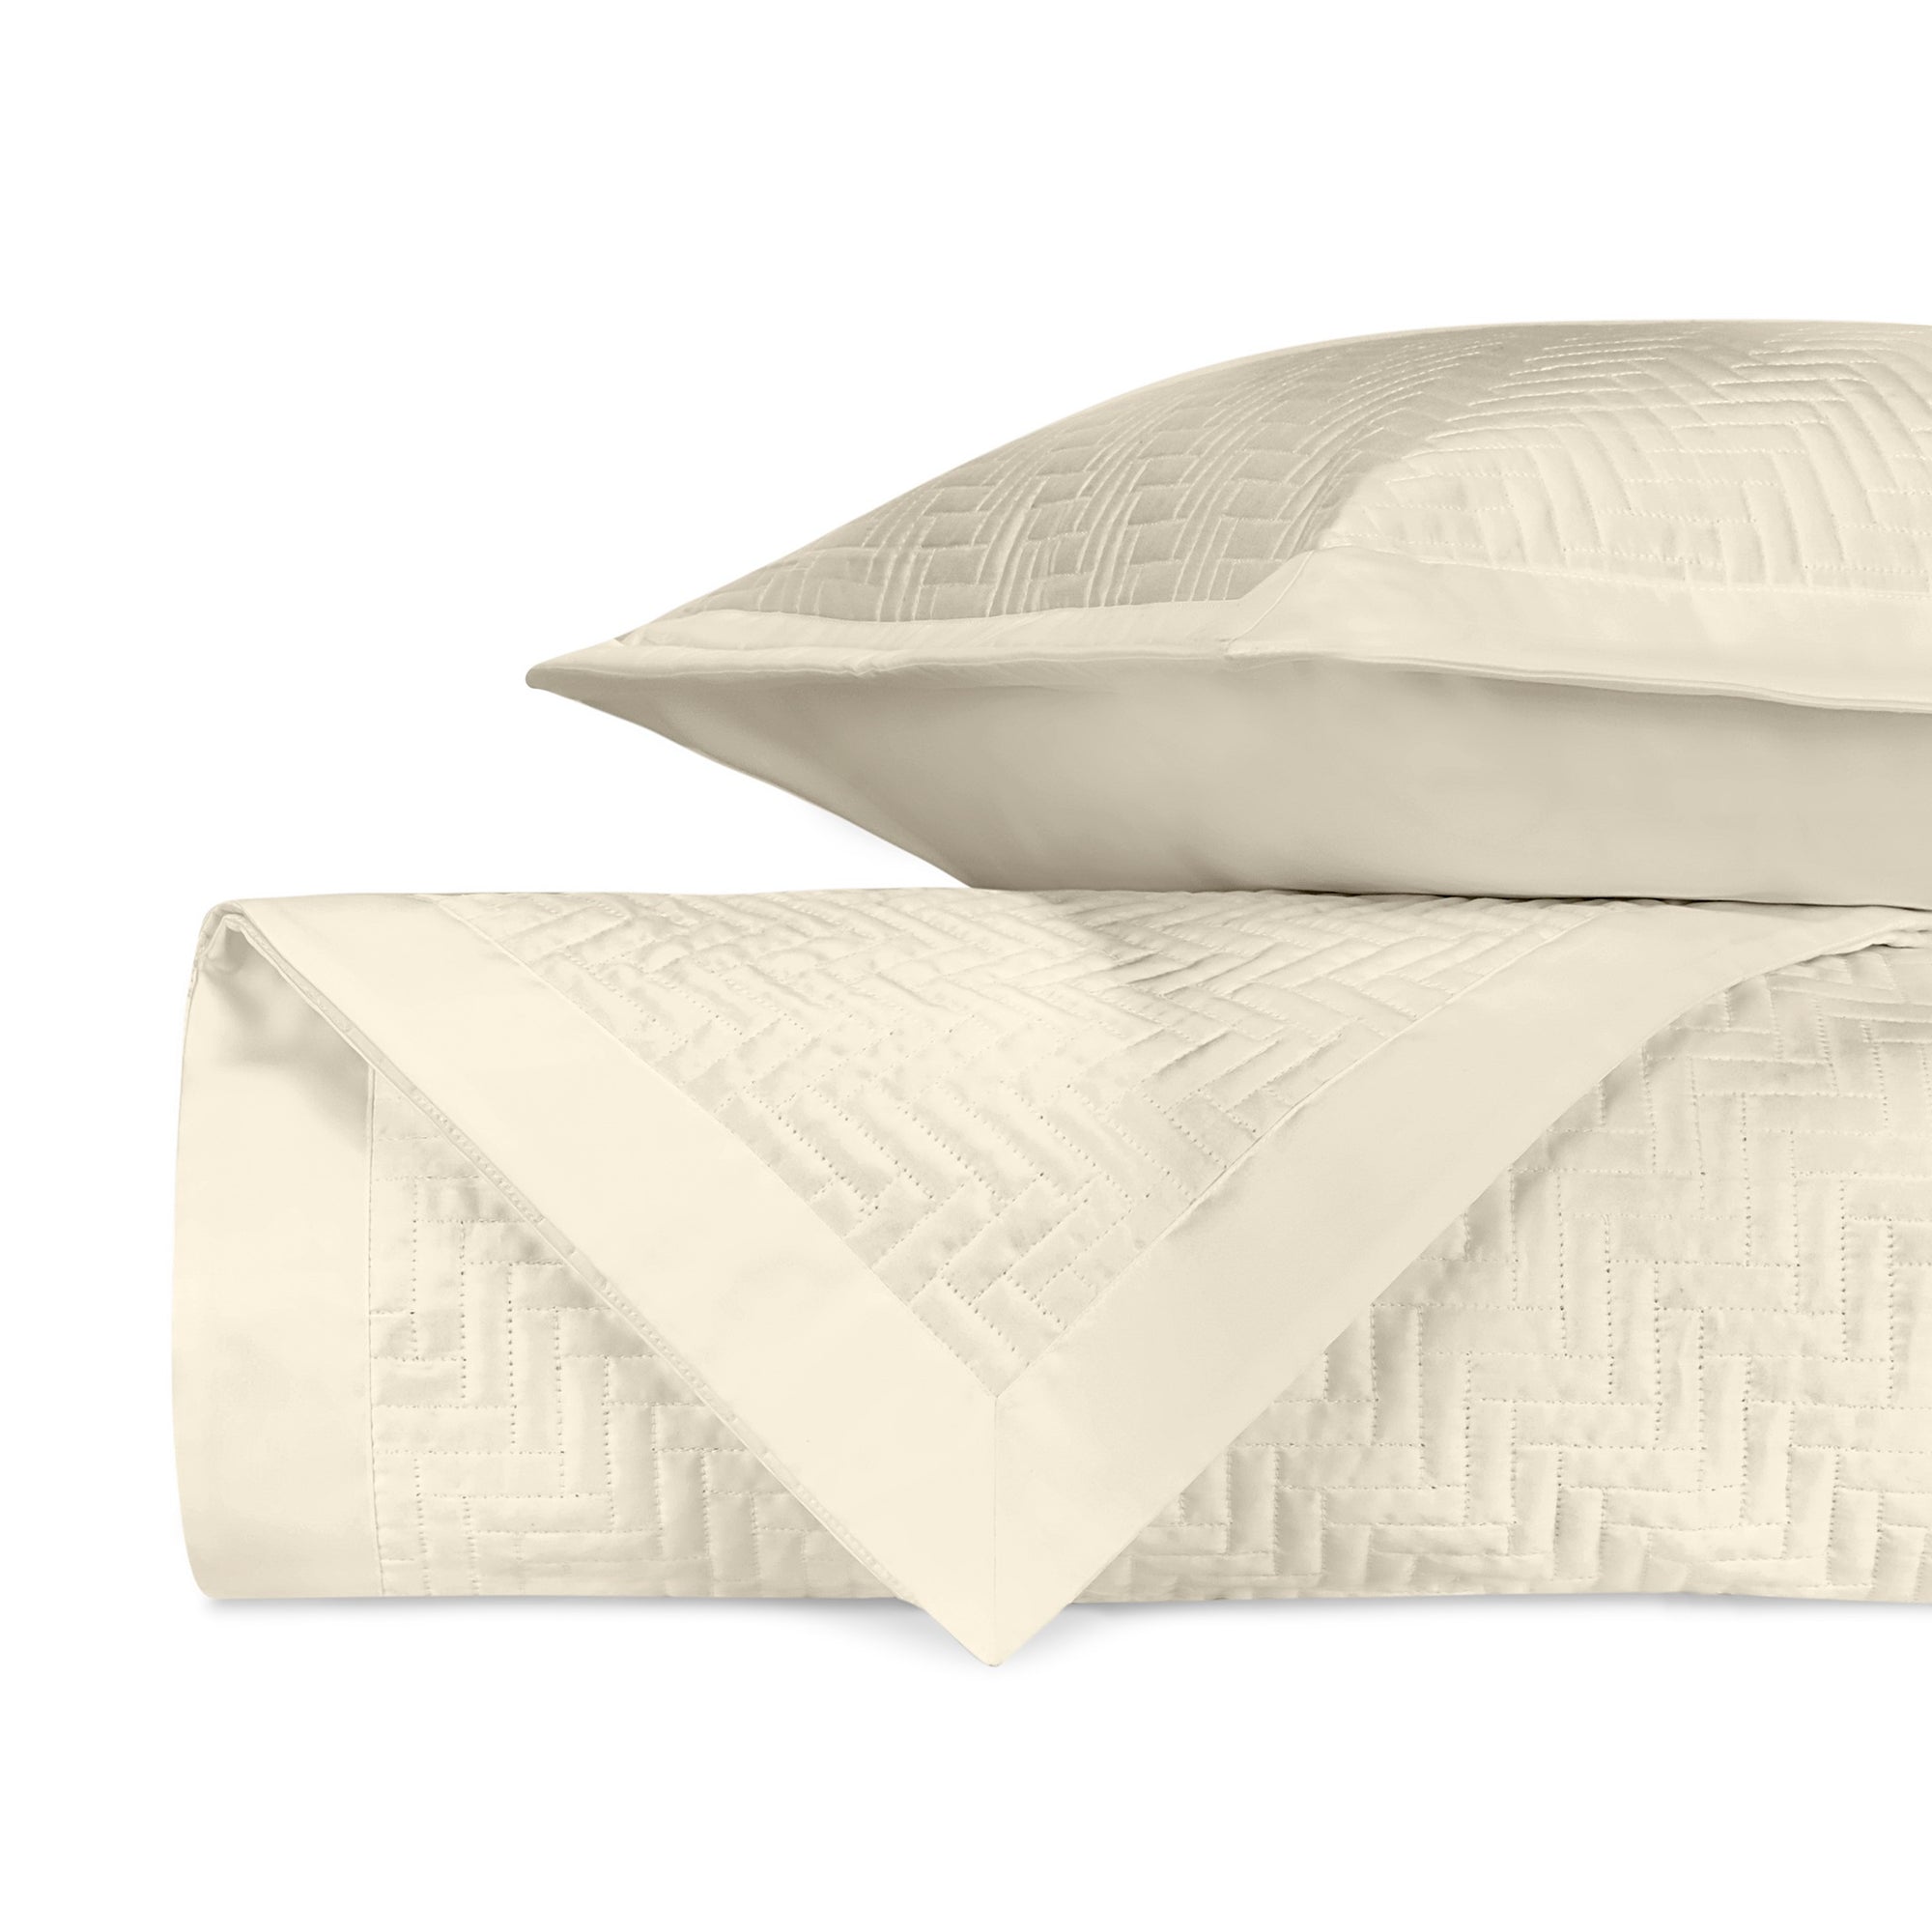 Stack Image of Home Treasures Baxter Royal Sateen Quilted Bedding in Color Ivory